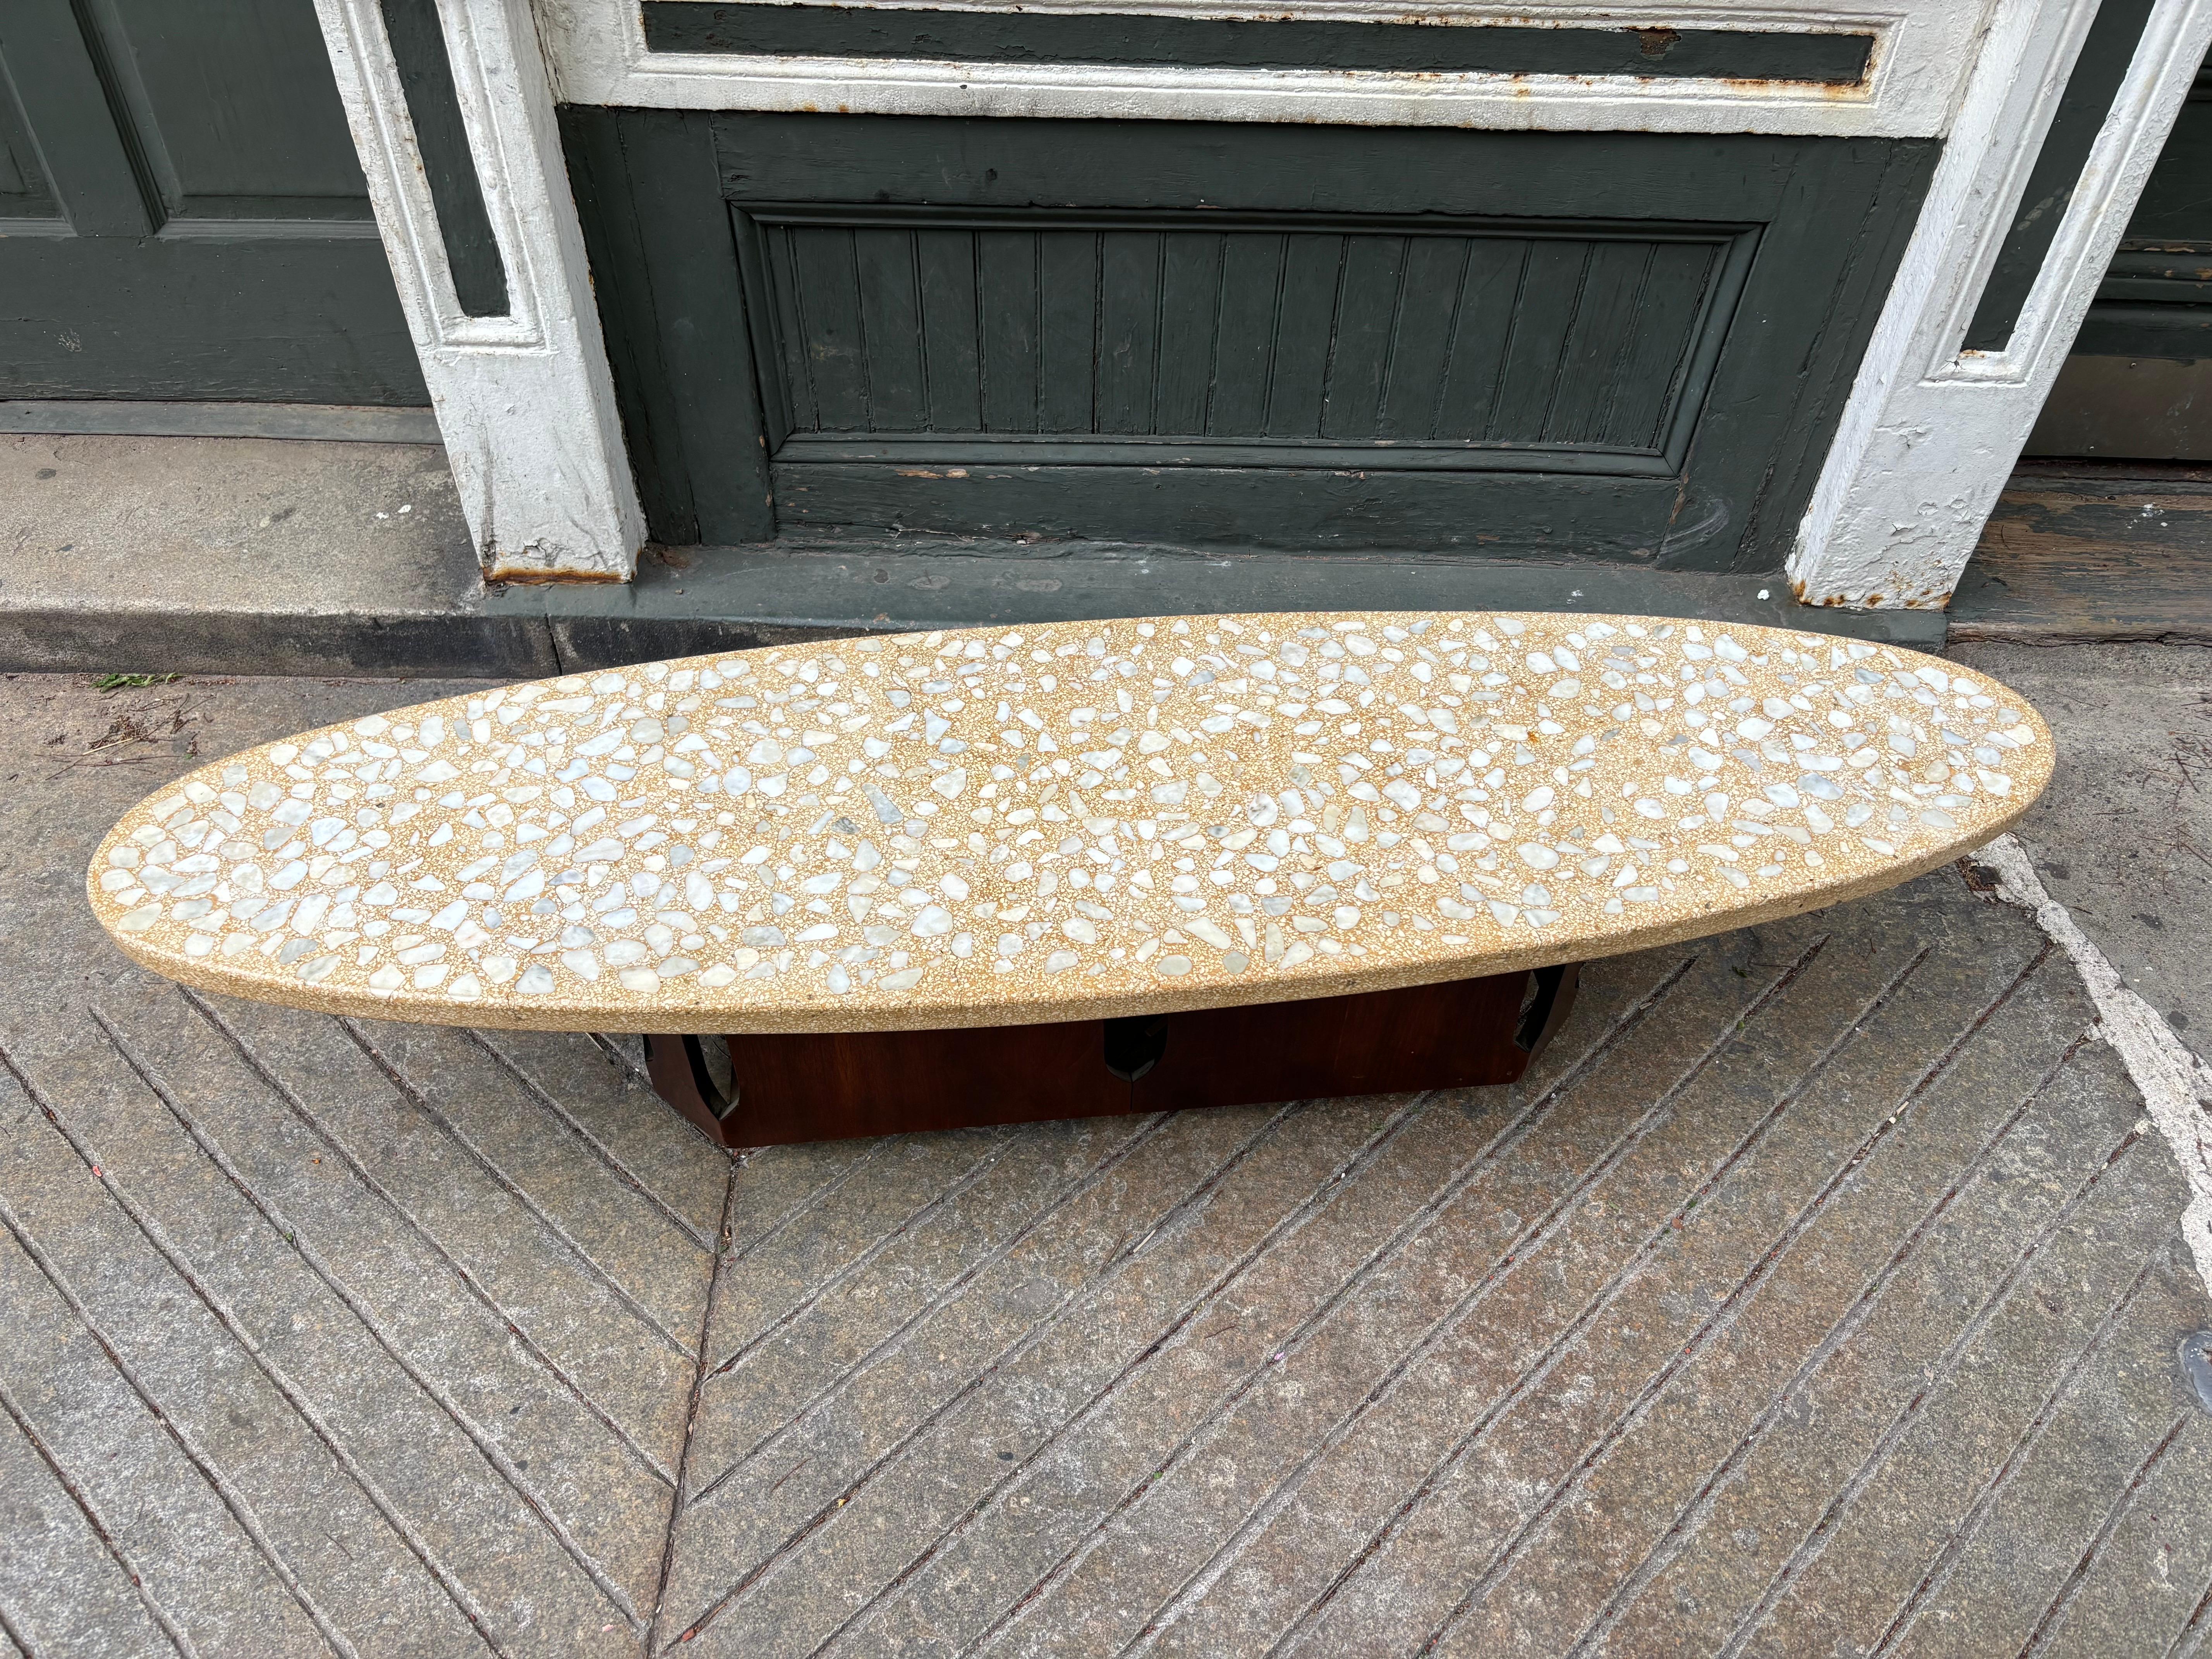 Harvey Probber attributed Terrazzo and Stone Inlay Surfboard Coffee Table.  Octogonal  Walnut Base with a Cut out design influenced from Moorish origins which had a resurgence in design in the 1960's.  Terrazzo is finished on a wood sub-surface so